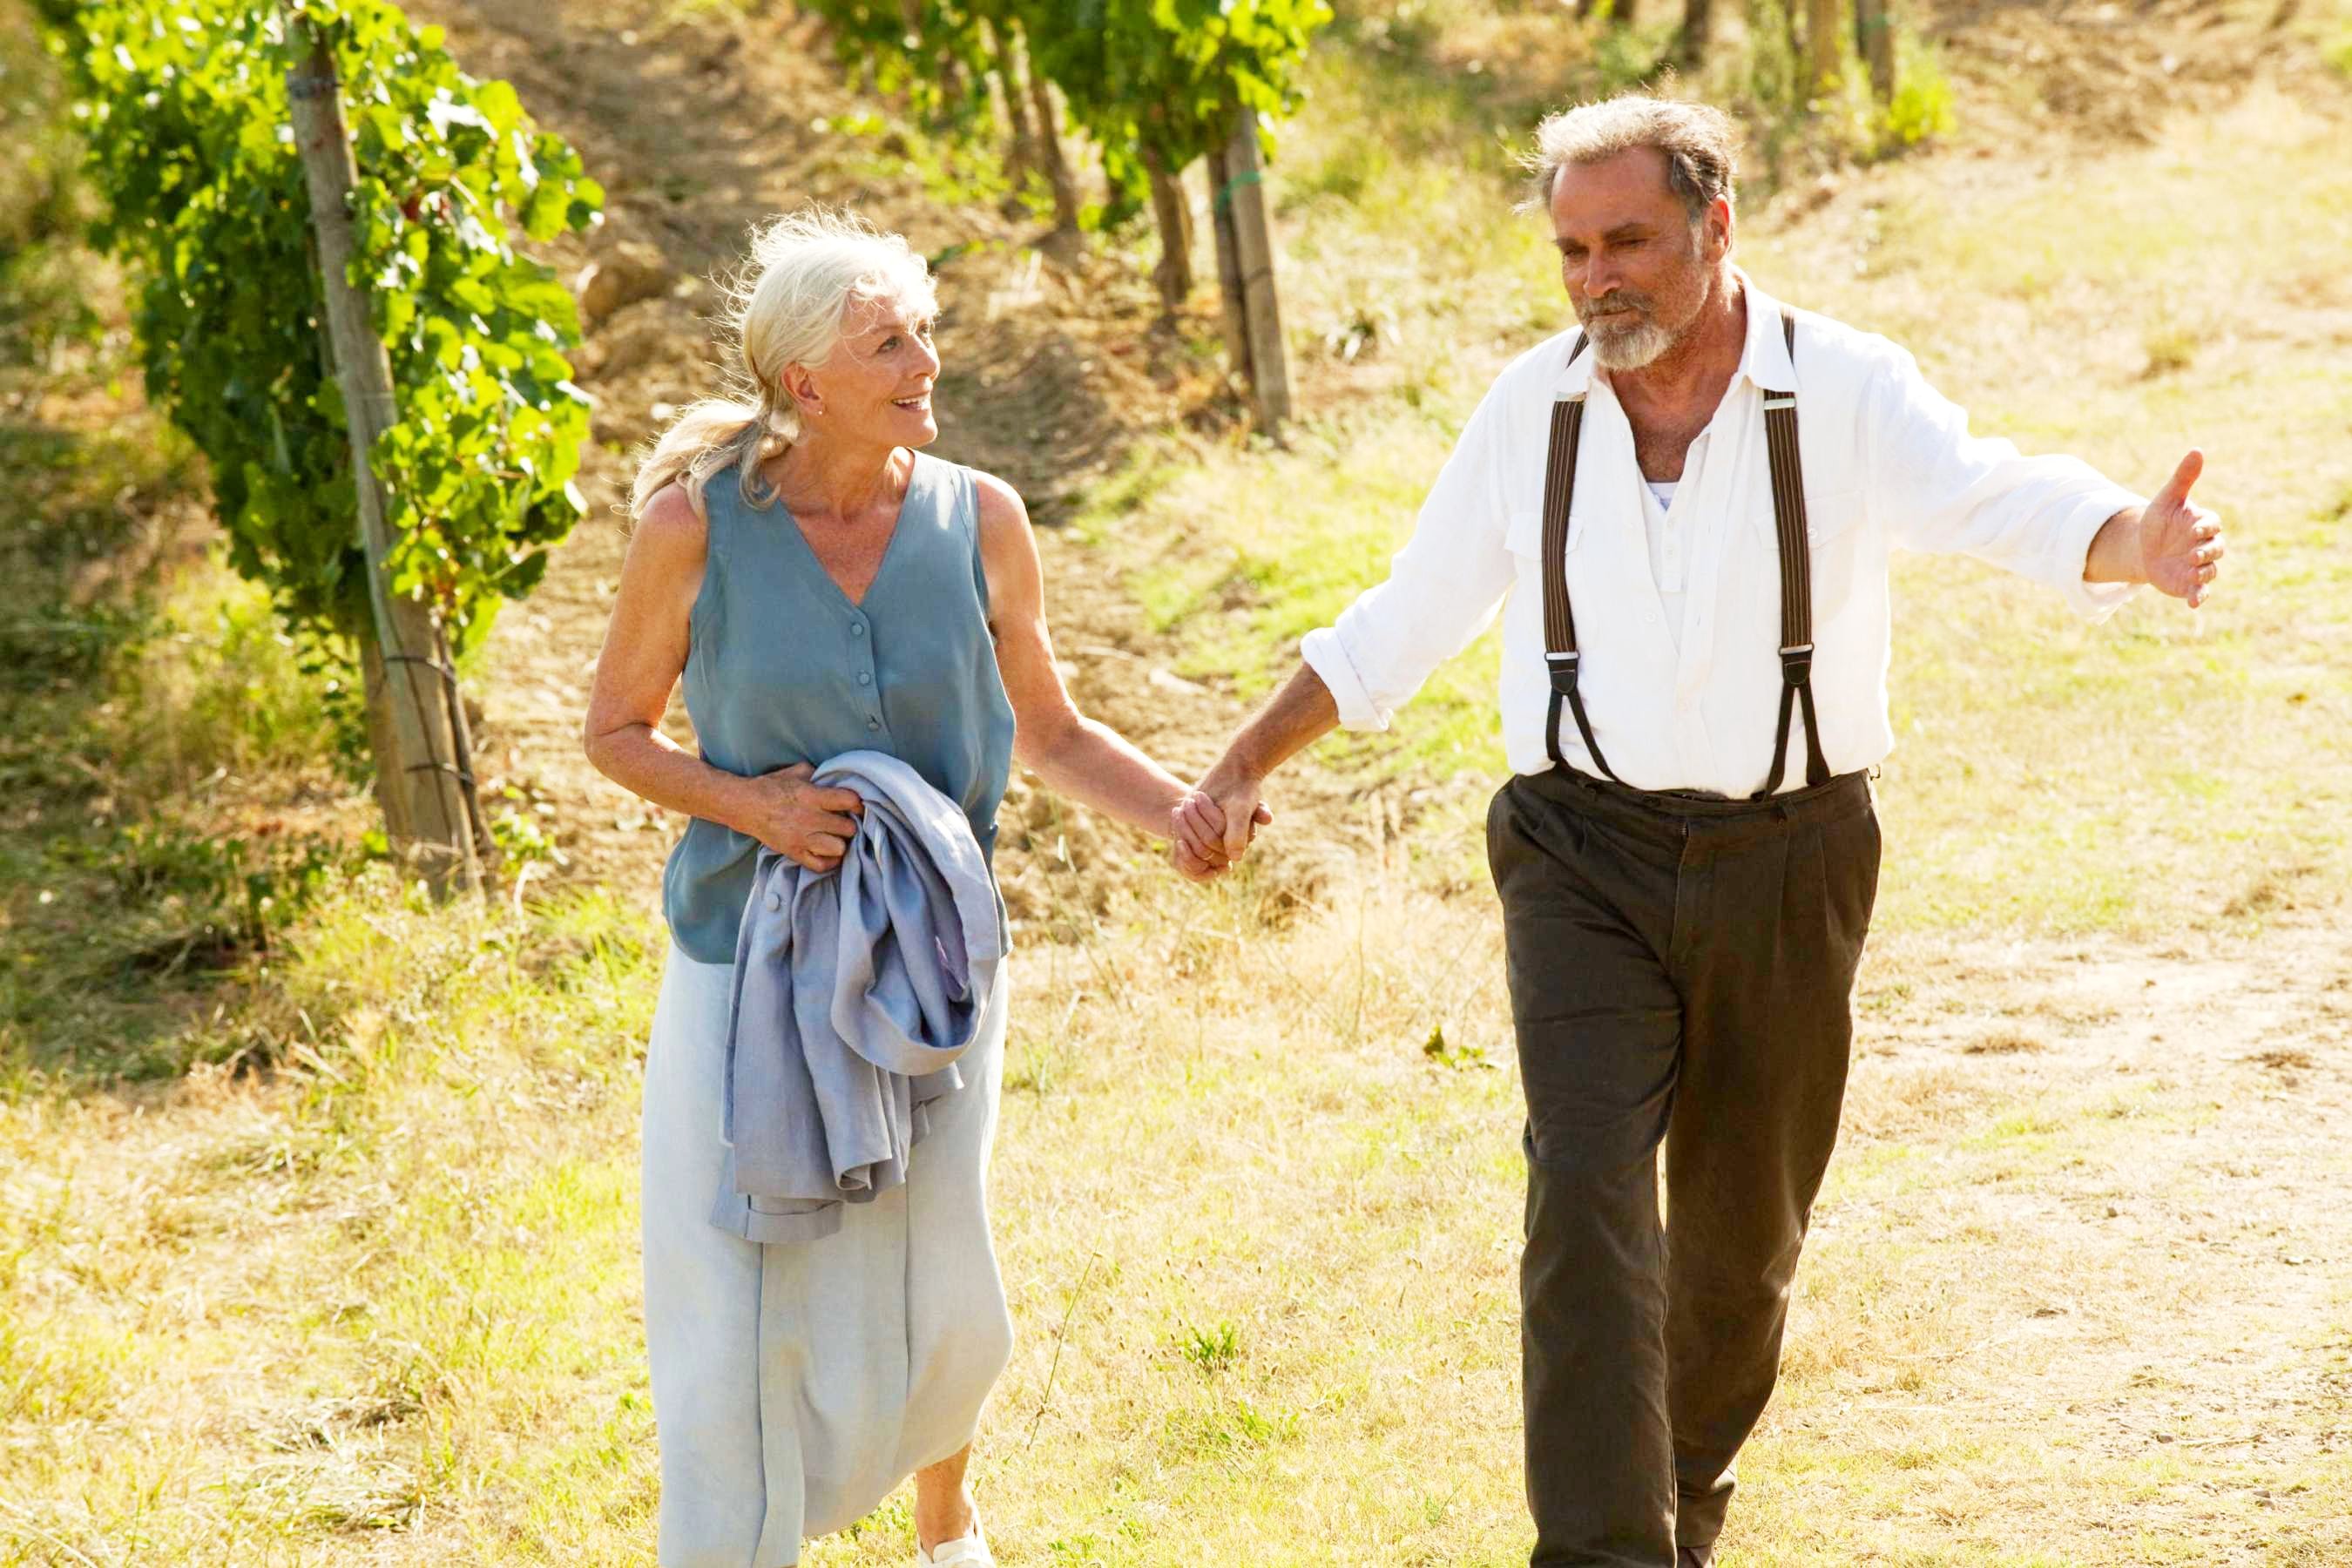 Vanessa Redgrave (Claire Wyman) and Franco Nero in Summit Entertainment's Letters to Juliet (2010). Photo credit by John Johnson.